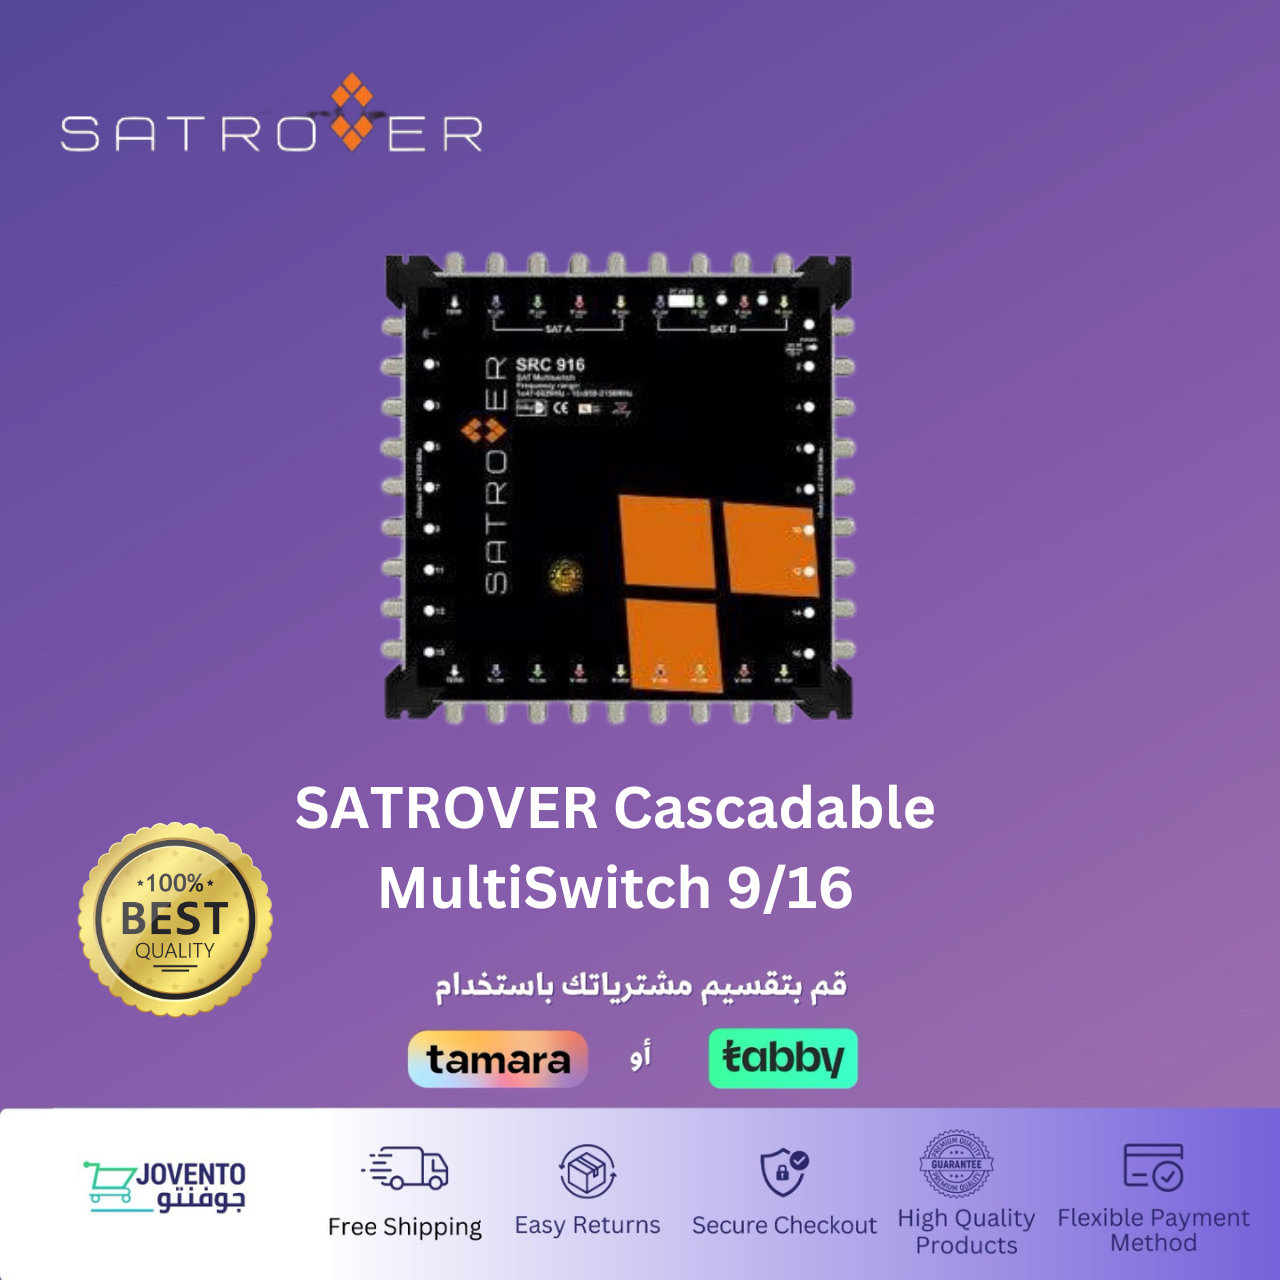 SATROVER Cascadable MultiSwitch 9/16